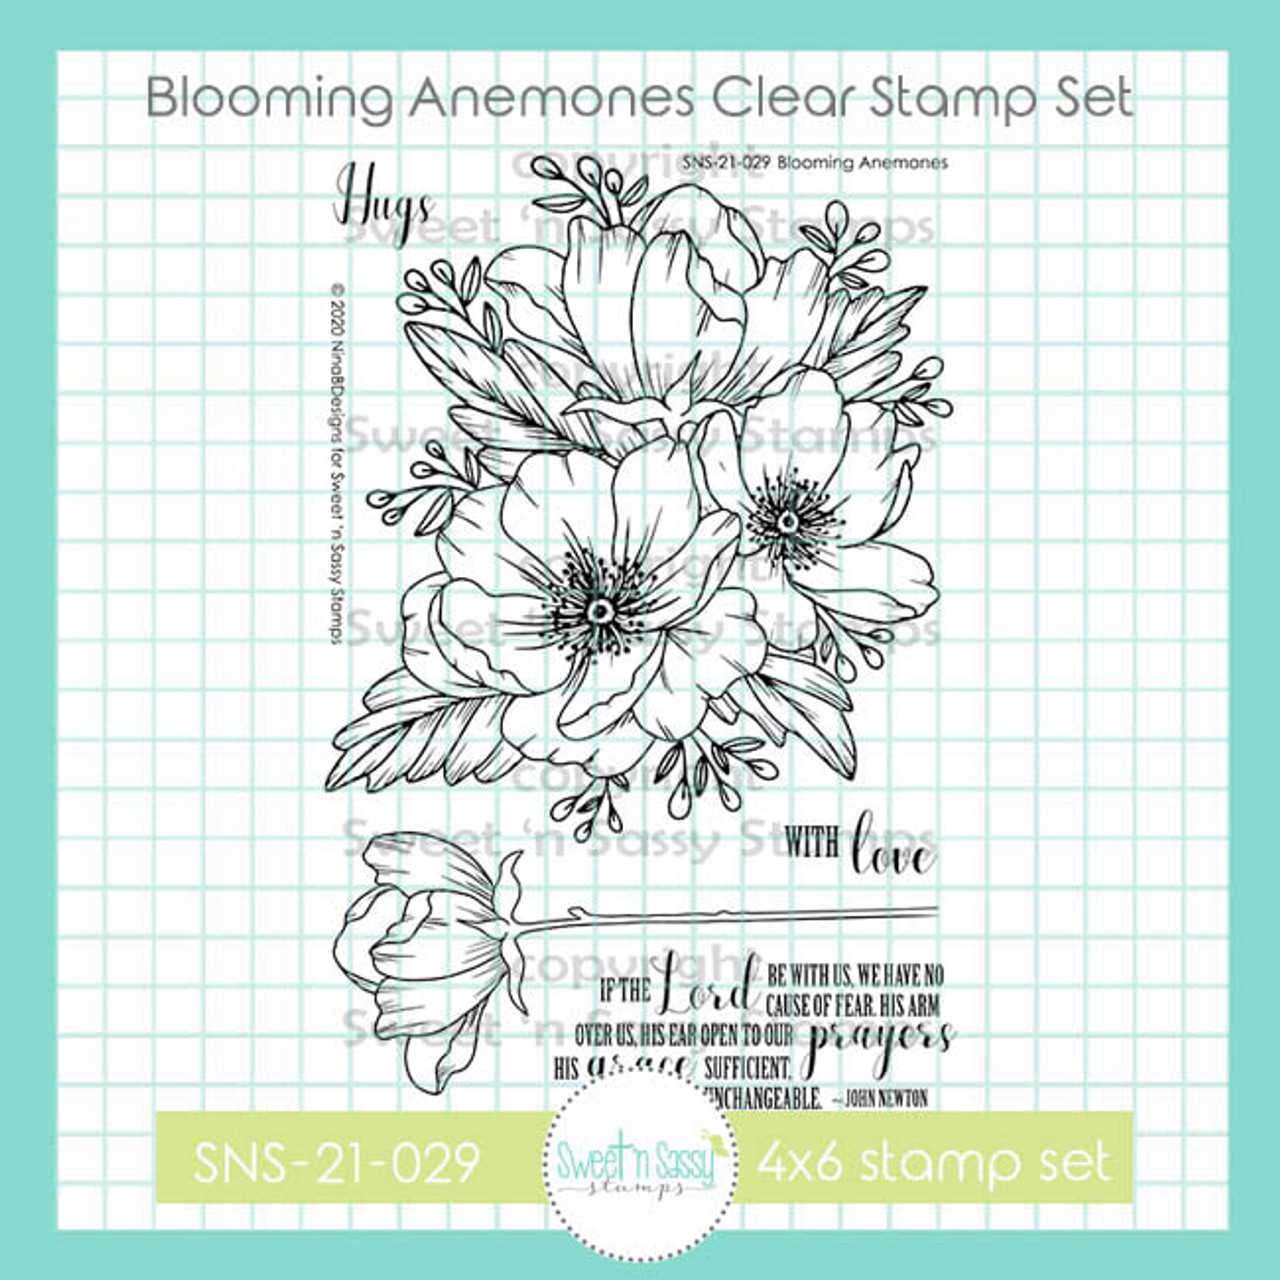 SnSS Blooming Anemones